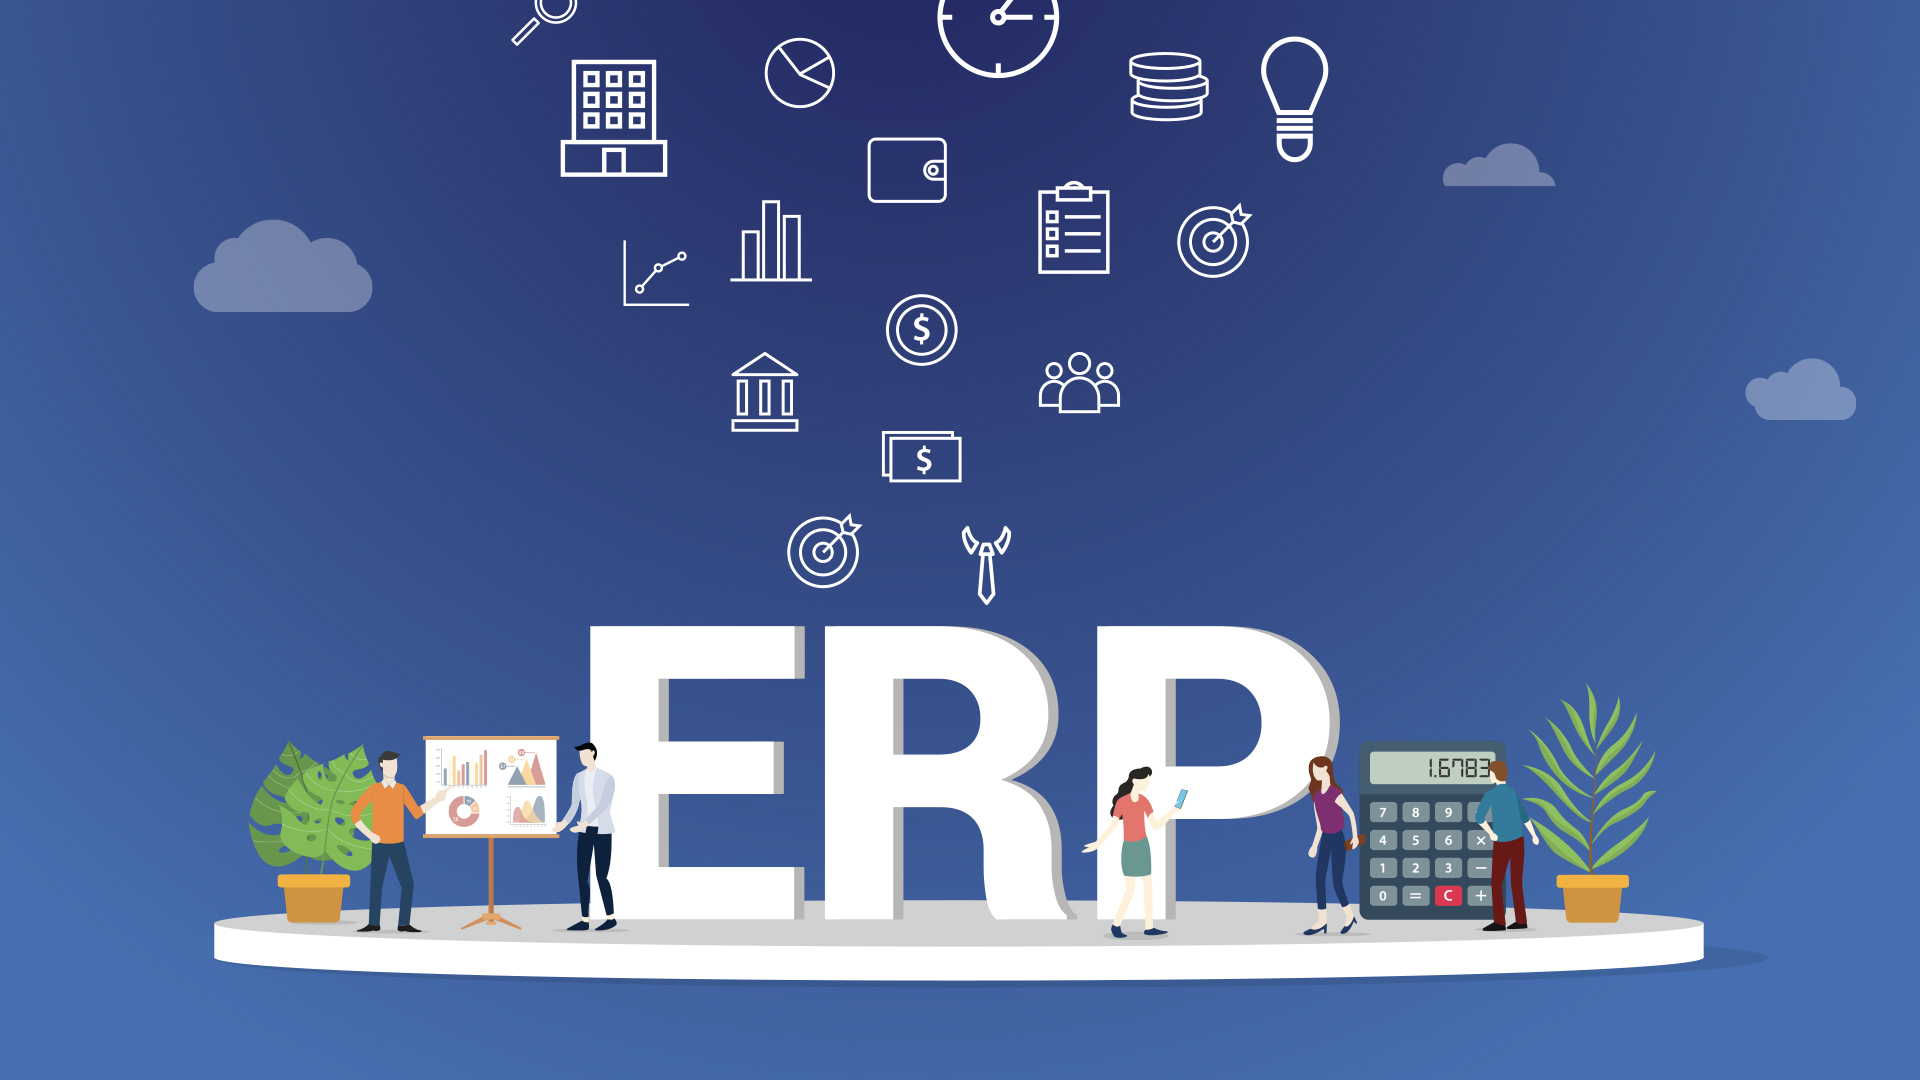 HOW TO IMPLEMENT A SUCCESSFUL ERP SYSTEM?